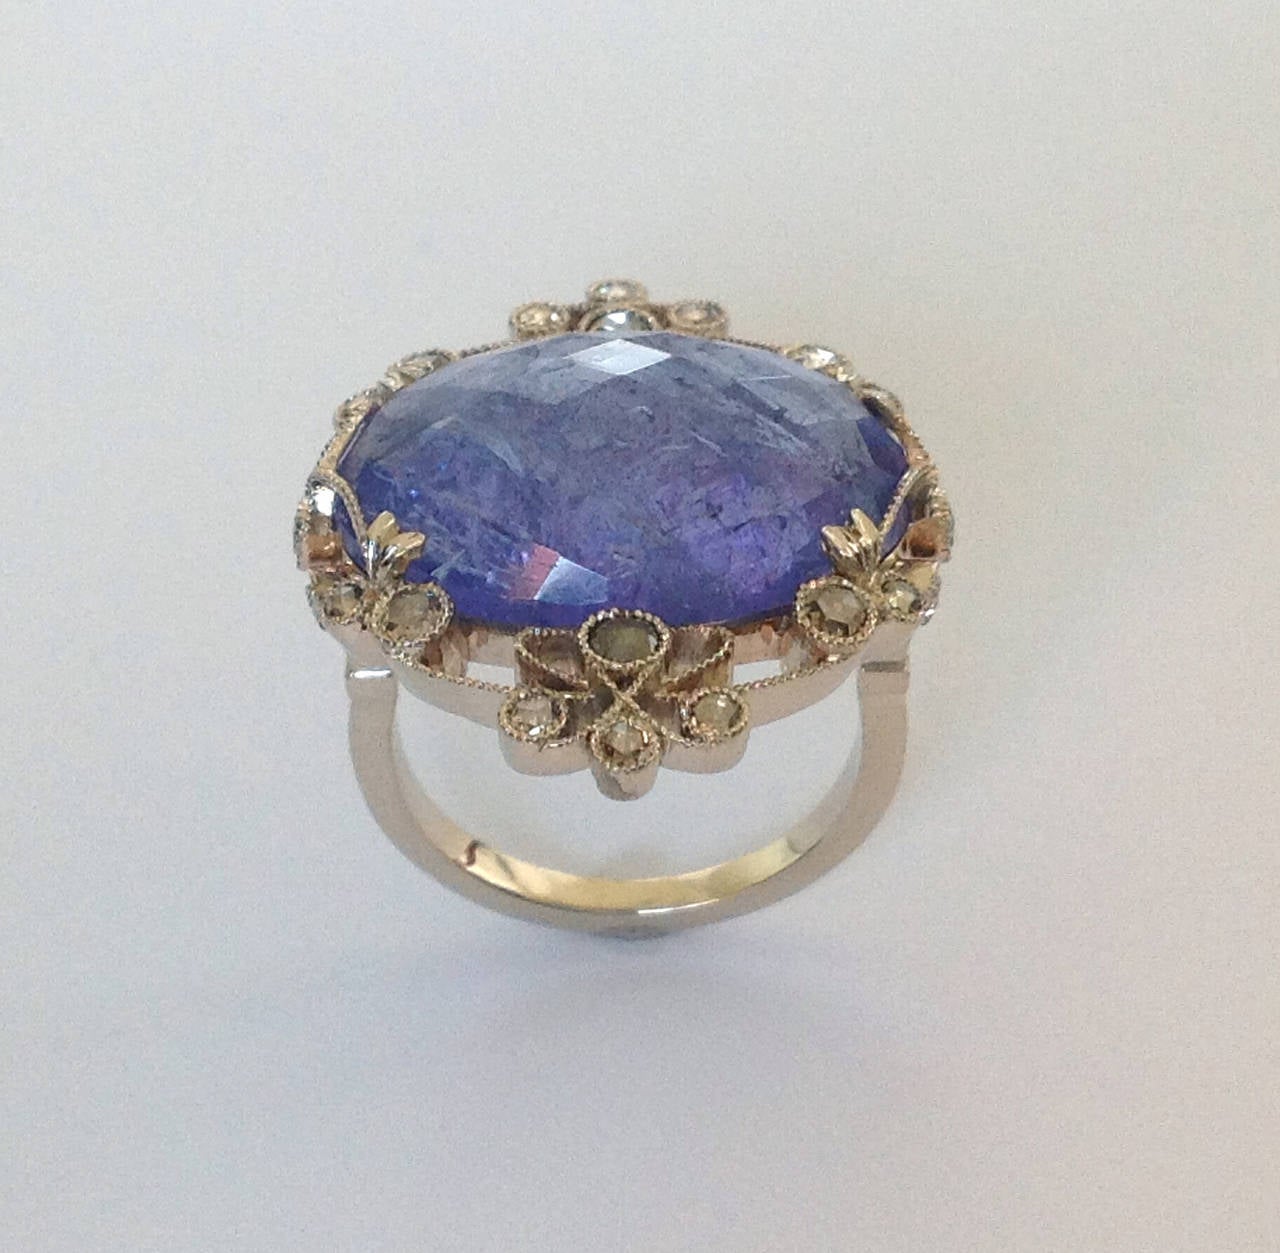 Dalben design Tanzanite And Diamond Ring mounted in 19 k white gold.
One Oval cut Tanzanite weighting 12,72 carat and 22 rose cut light brown Diamonds weighting 0,49 carats.
Ring size 7 USA - 54 EU resizable to most finger sizes. 
The Ring is